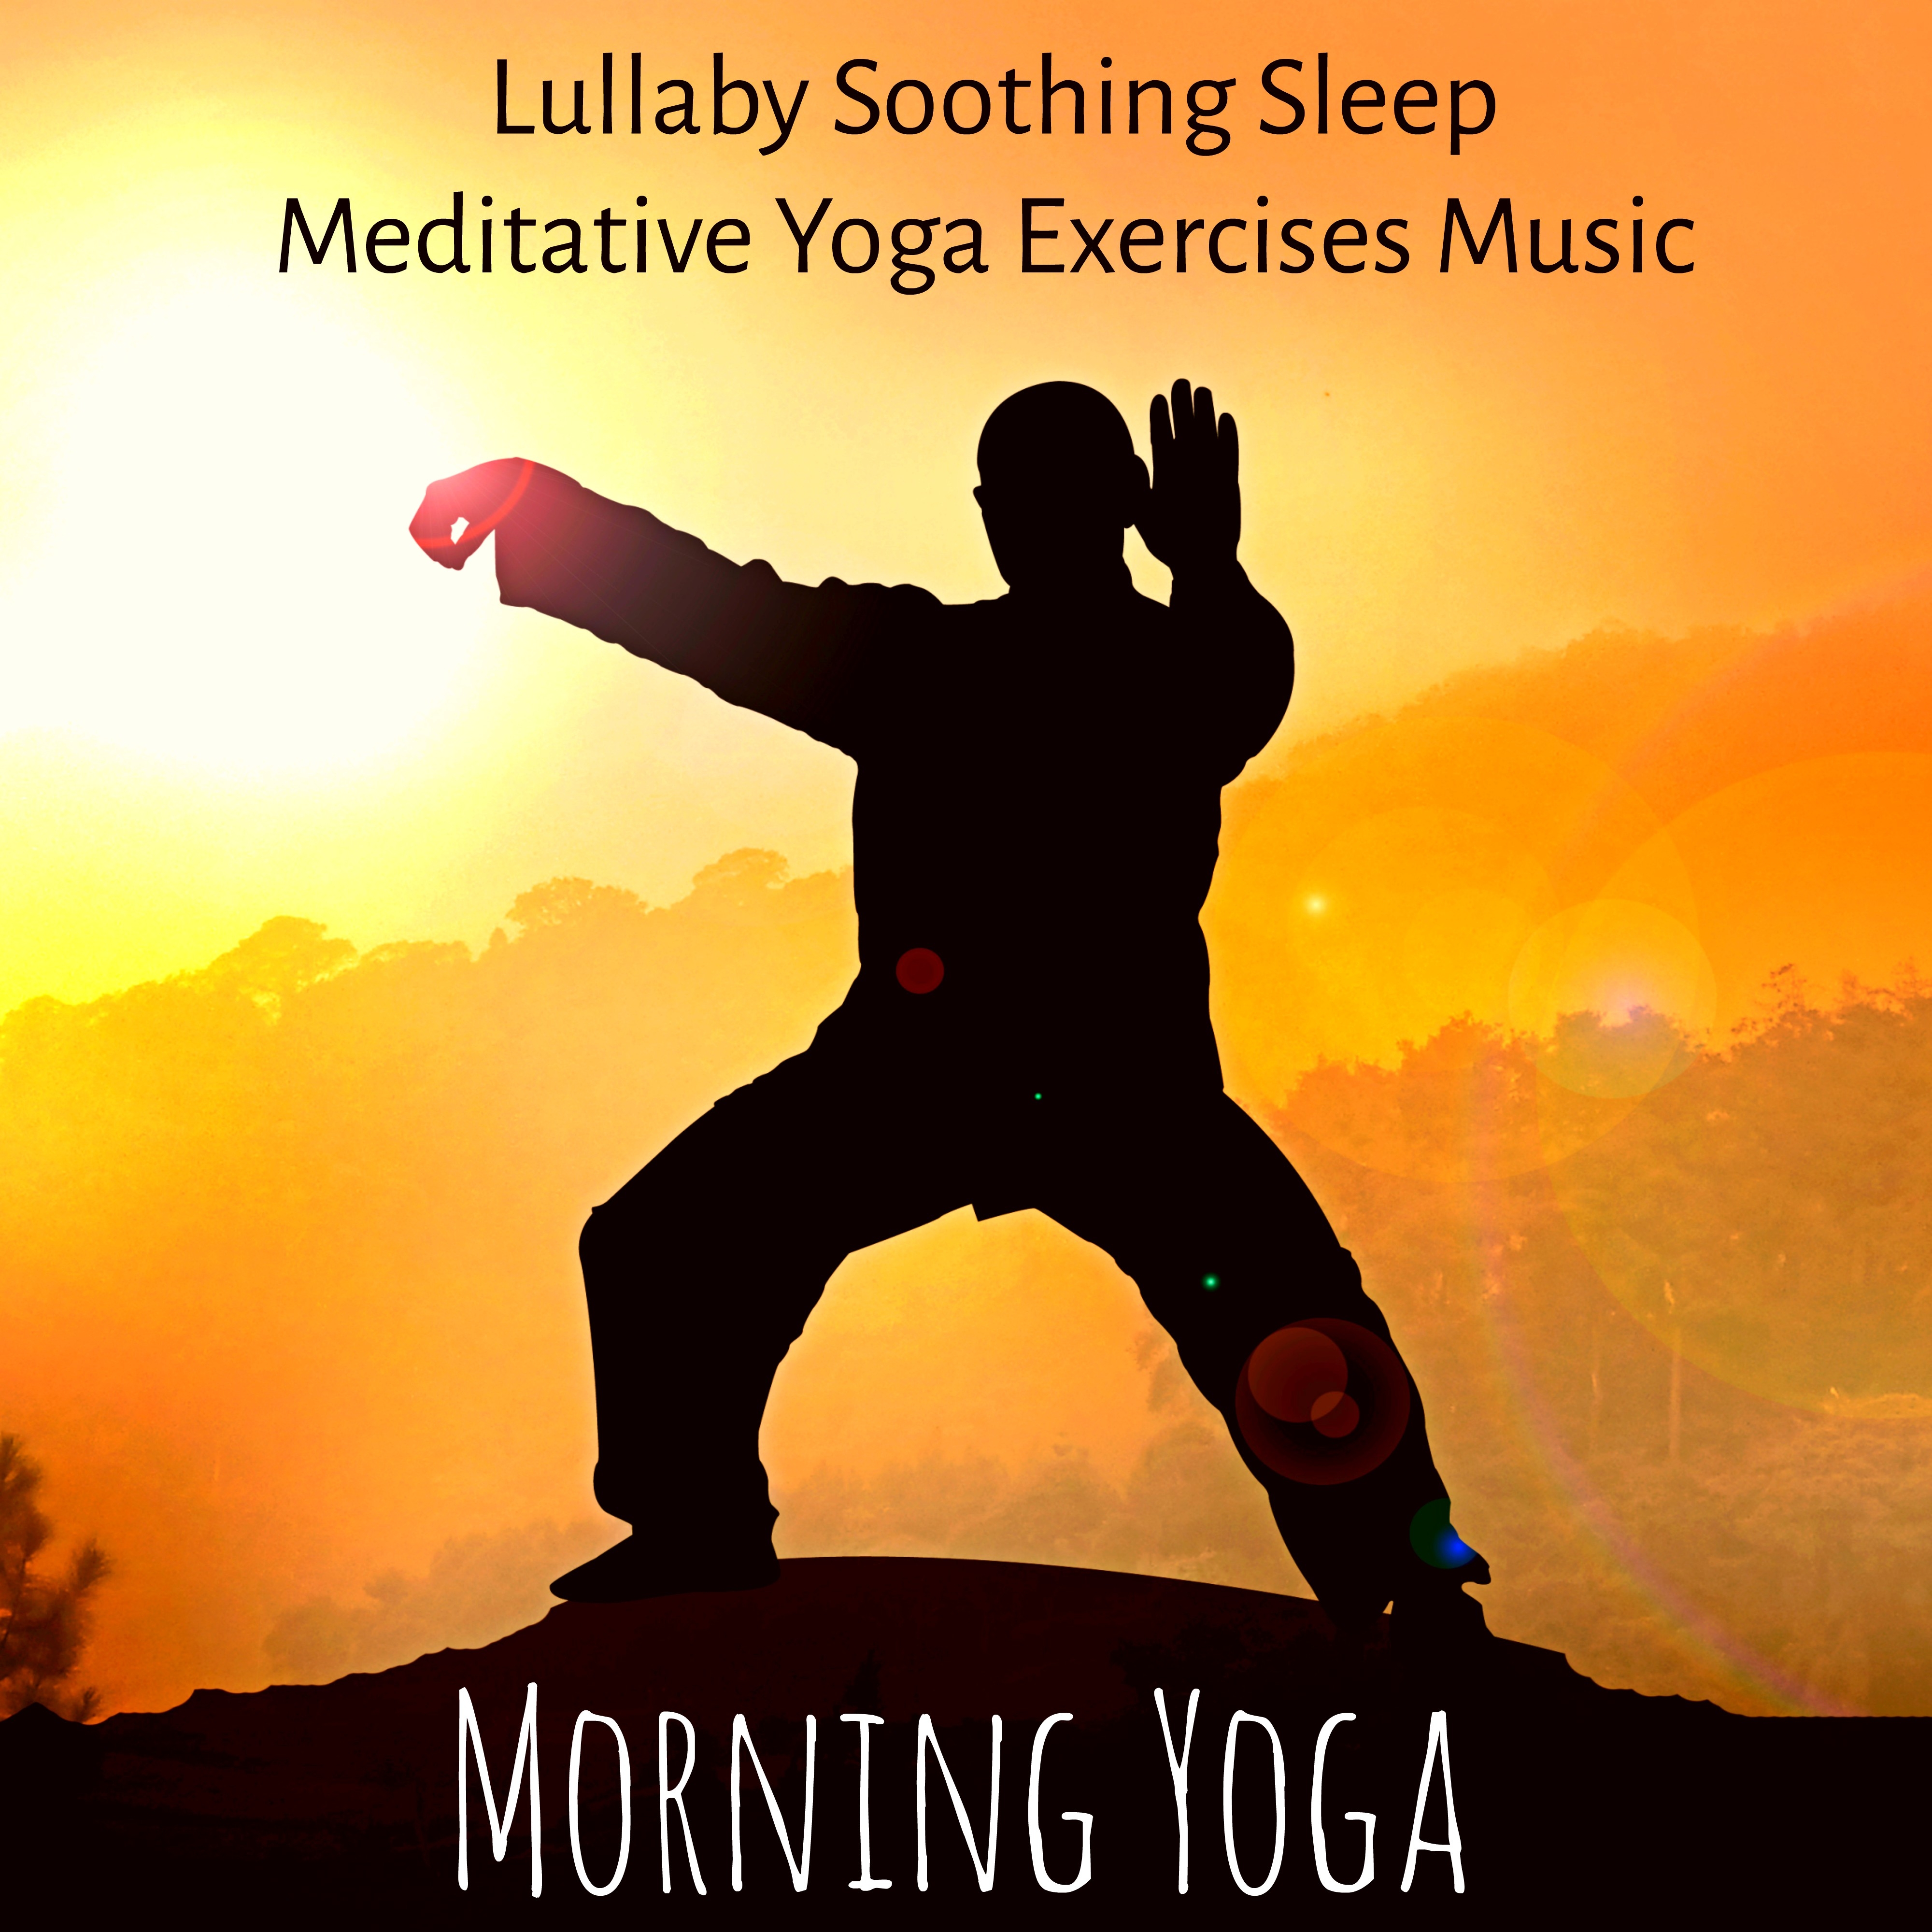 Morning Yoga - Lullaby Soothing Sleep Meditative Yoga Exercises Music with Nature Relaxing Wellness Sounds